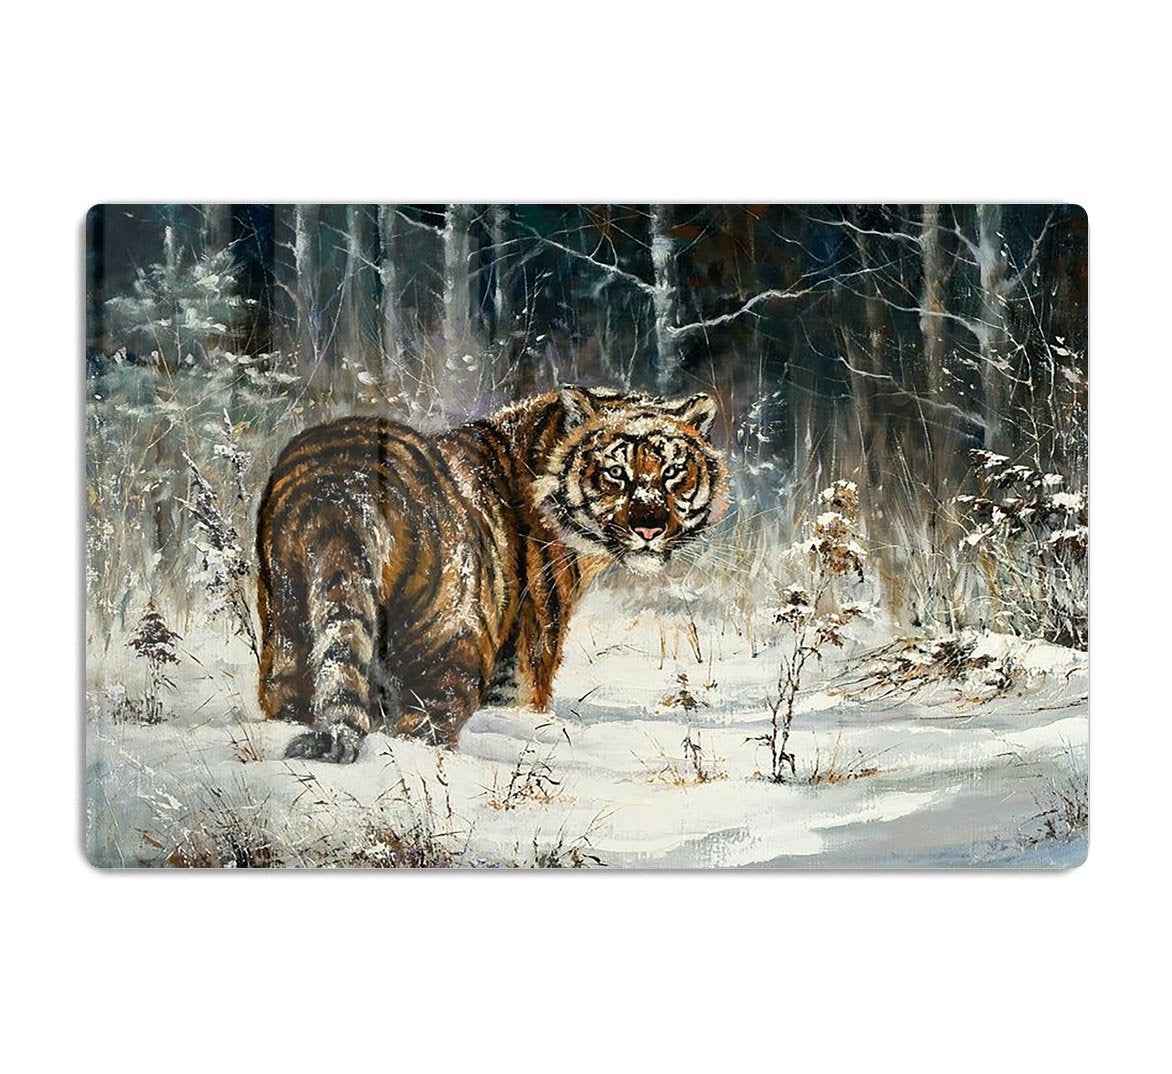 Landscape with a tiger in winter wood HD Metal Print - Canvas Art Rocks - 1